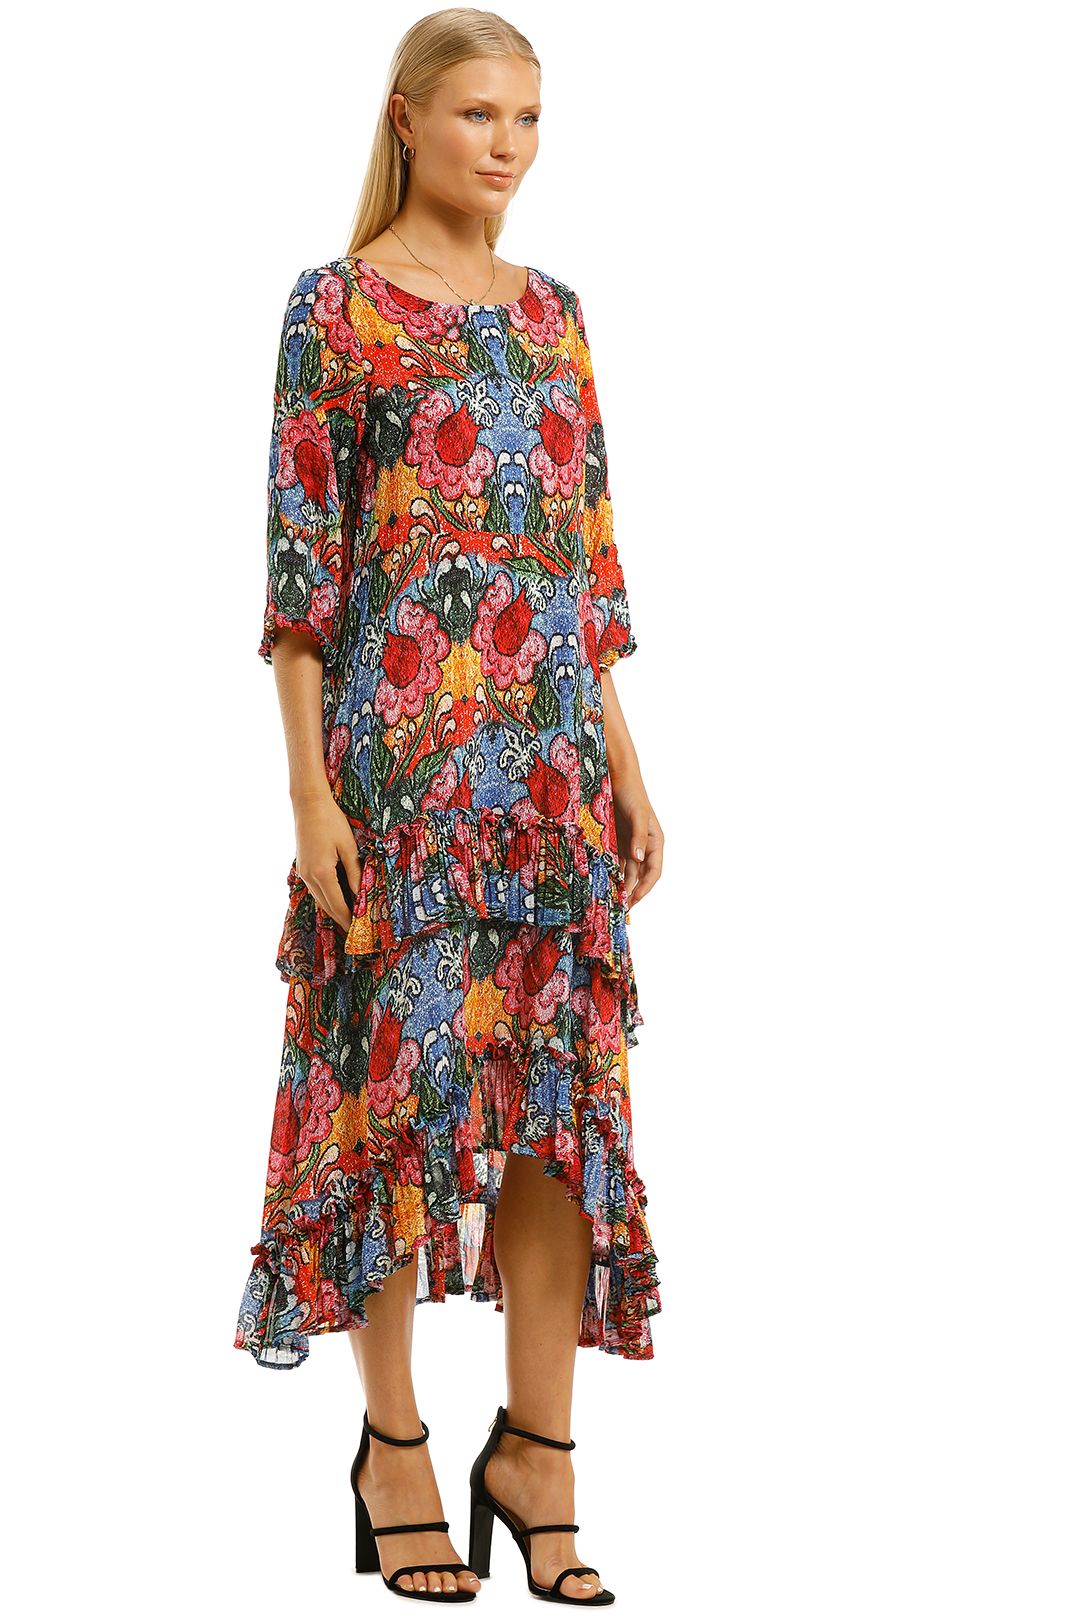 Curate-by-Trelise-Cooper-True-Romance-Dress-Floral-Side